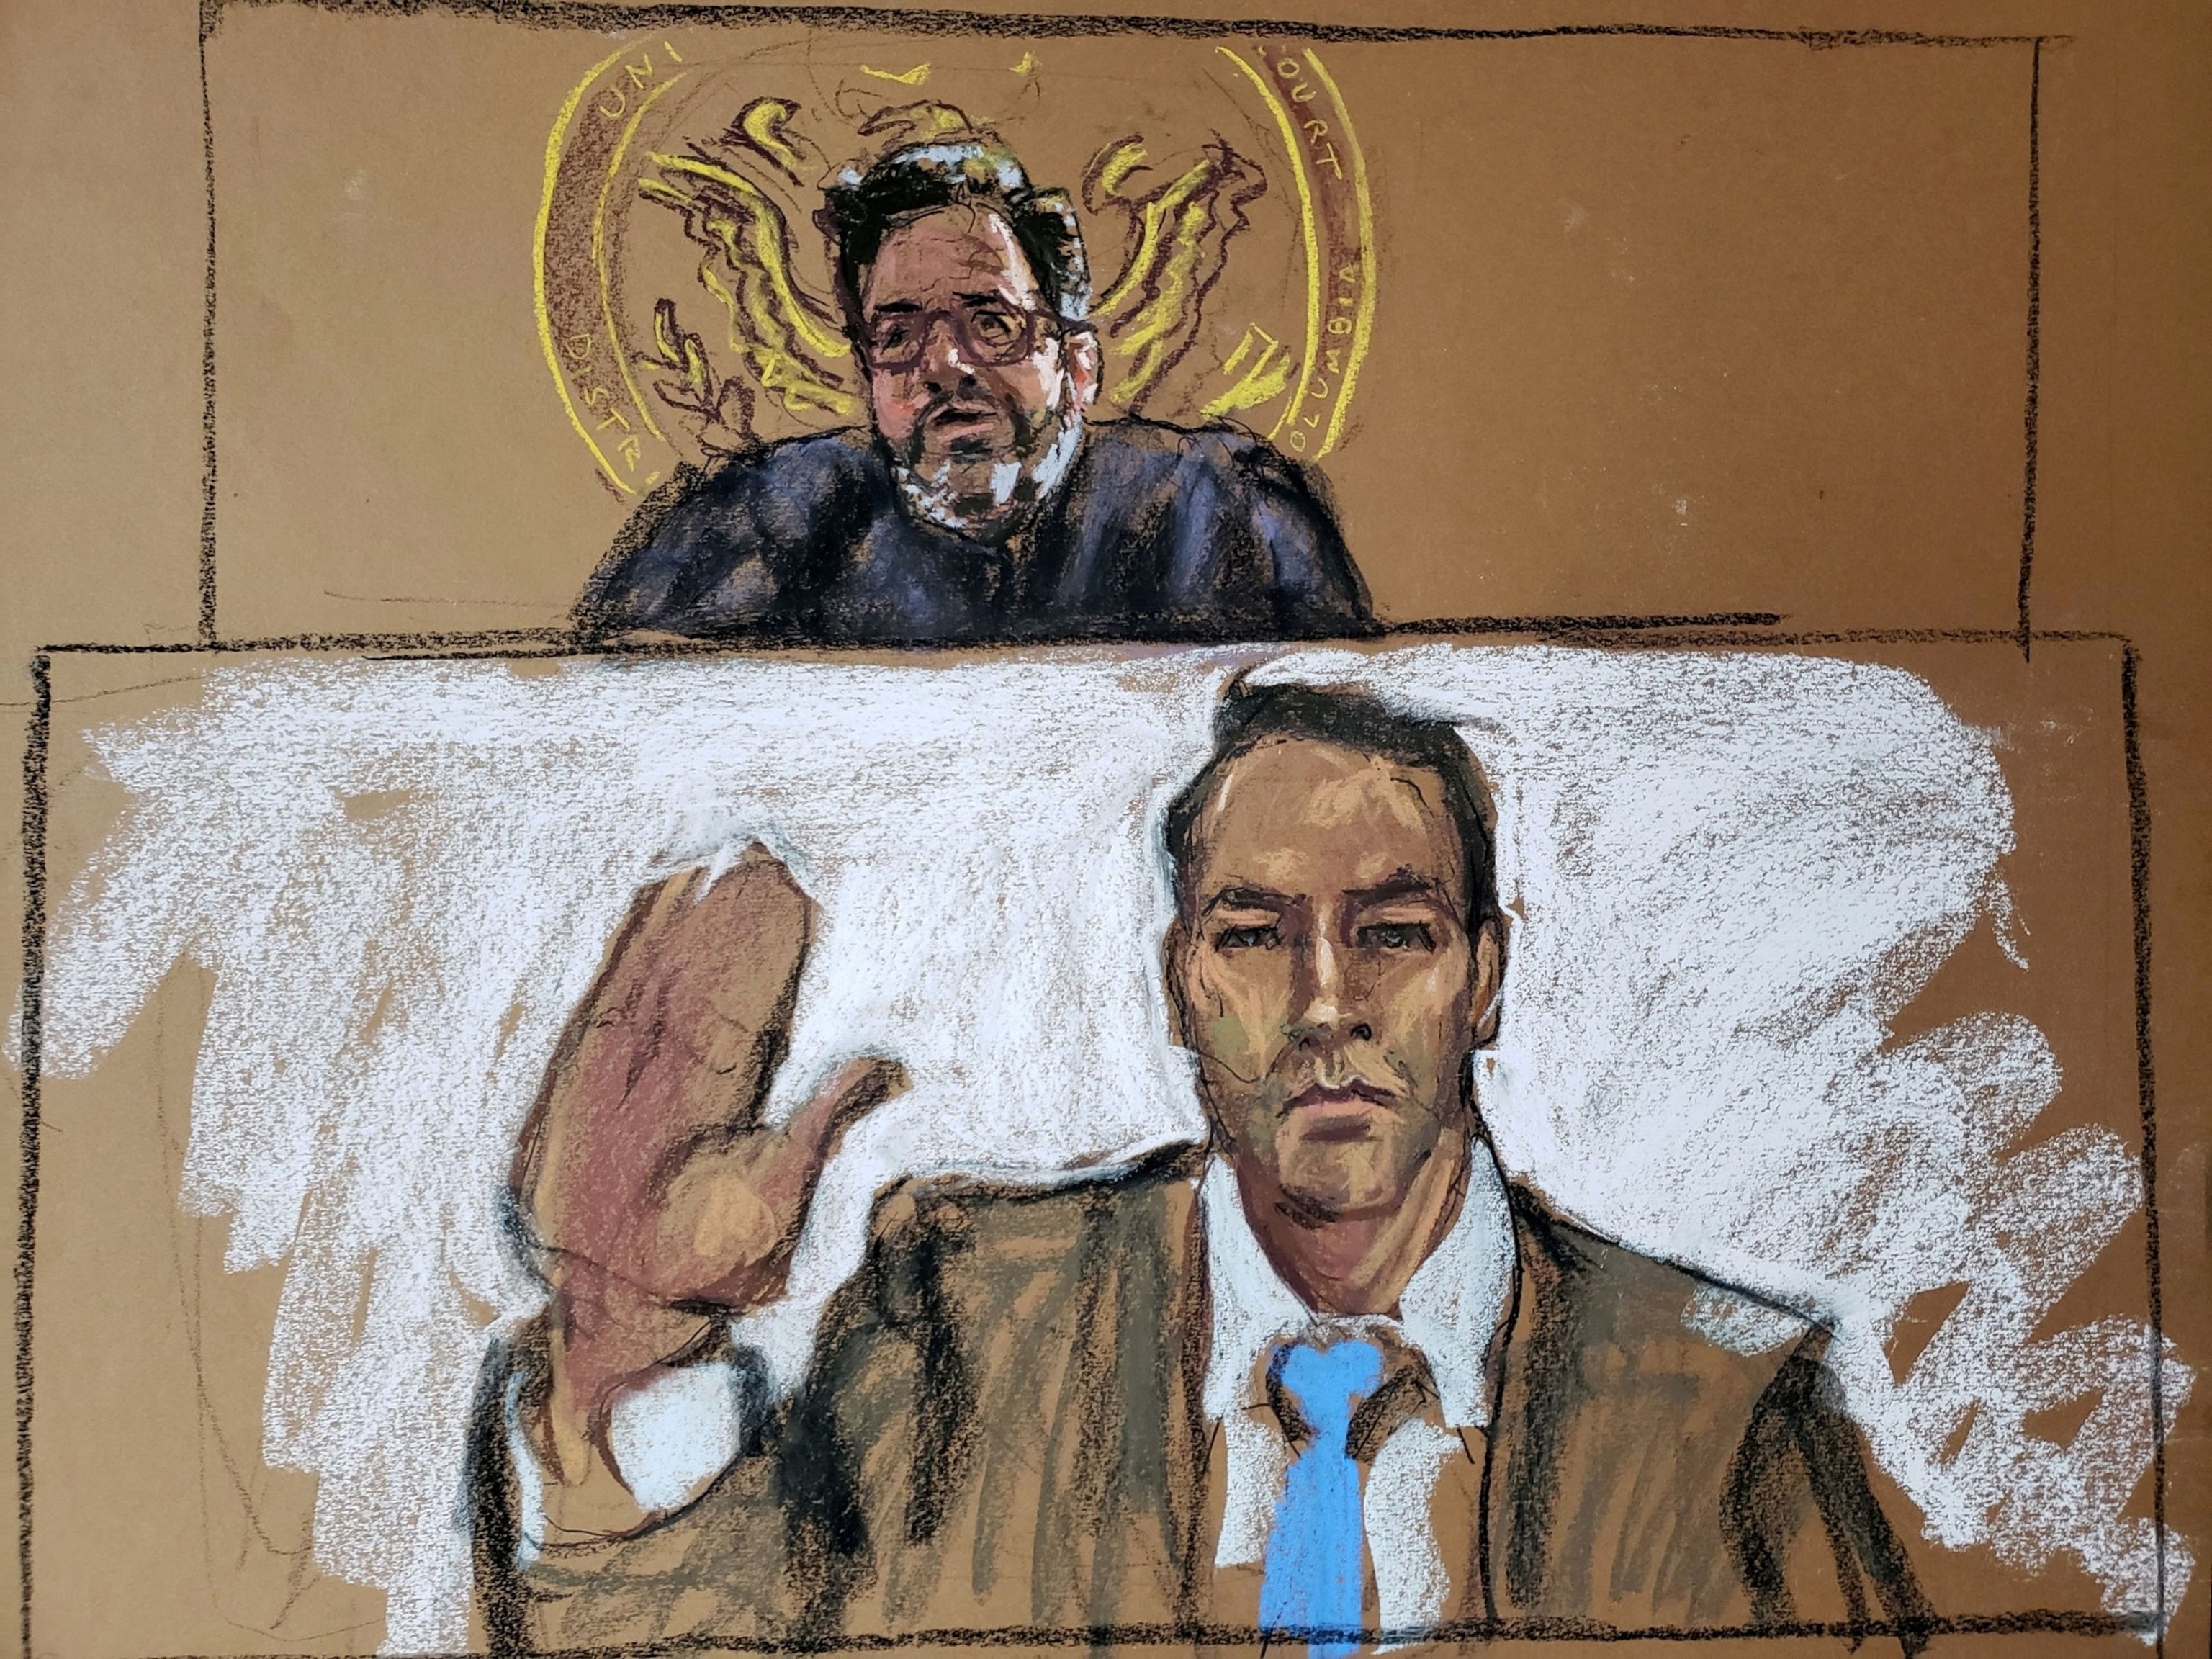 PHOTO: Olympic swimmer Klete Keller appears in this courtroom sketch during a virtual hearing in a District of Columbia court, Jan. 22, 2021, on charges related to the January 6th storming of the U.S. Capitol in Washington, D.C.